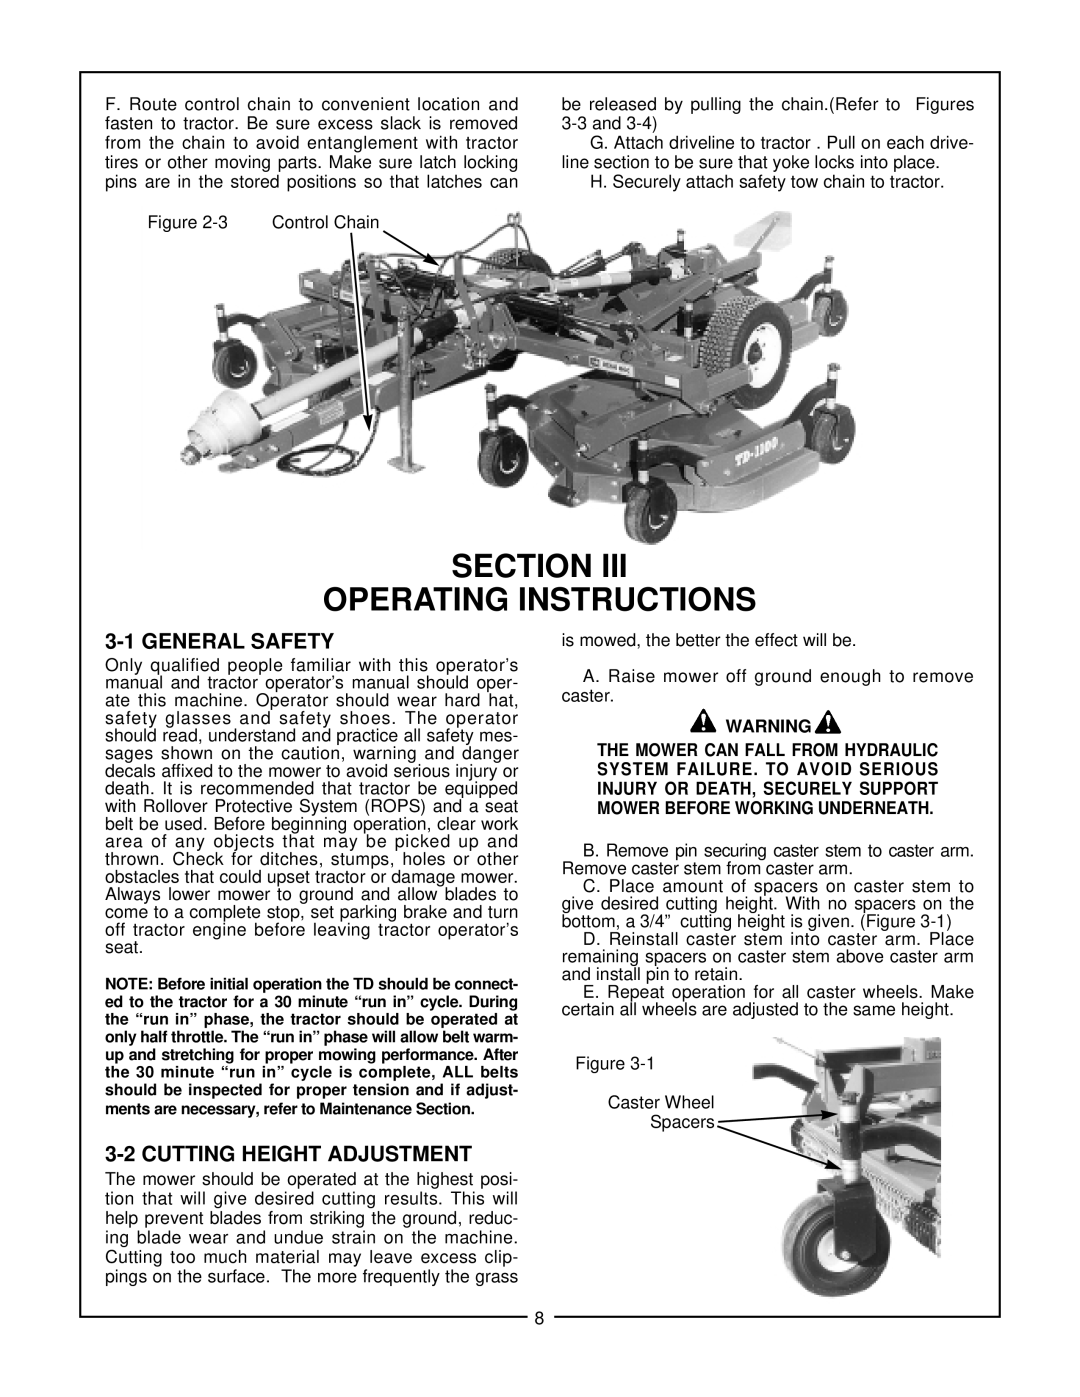 Bush Hog TD-1100 manual Section Operating Instructions, 3-1GENERAL SAFETY, 3-2CUTTING HEIGHT ADJUSTMENT 